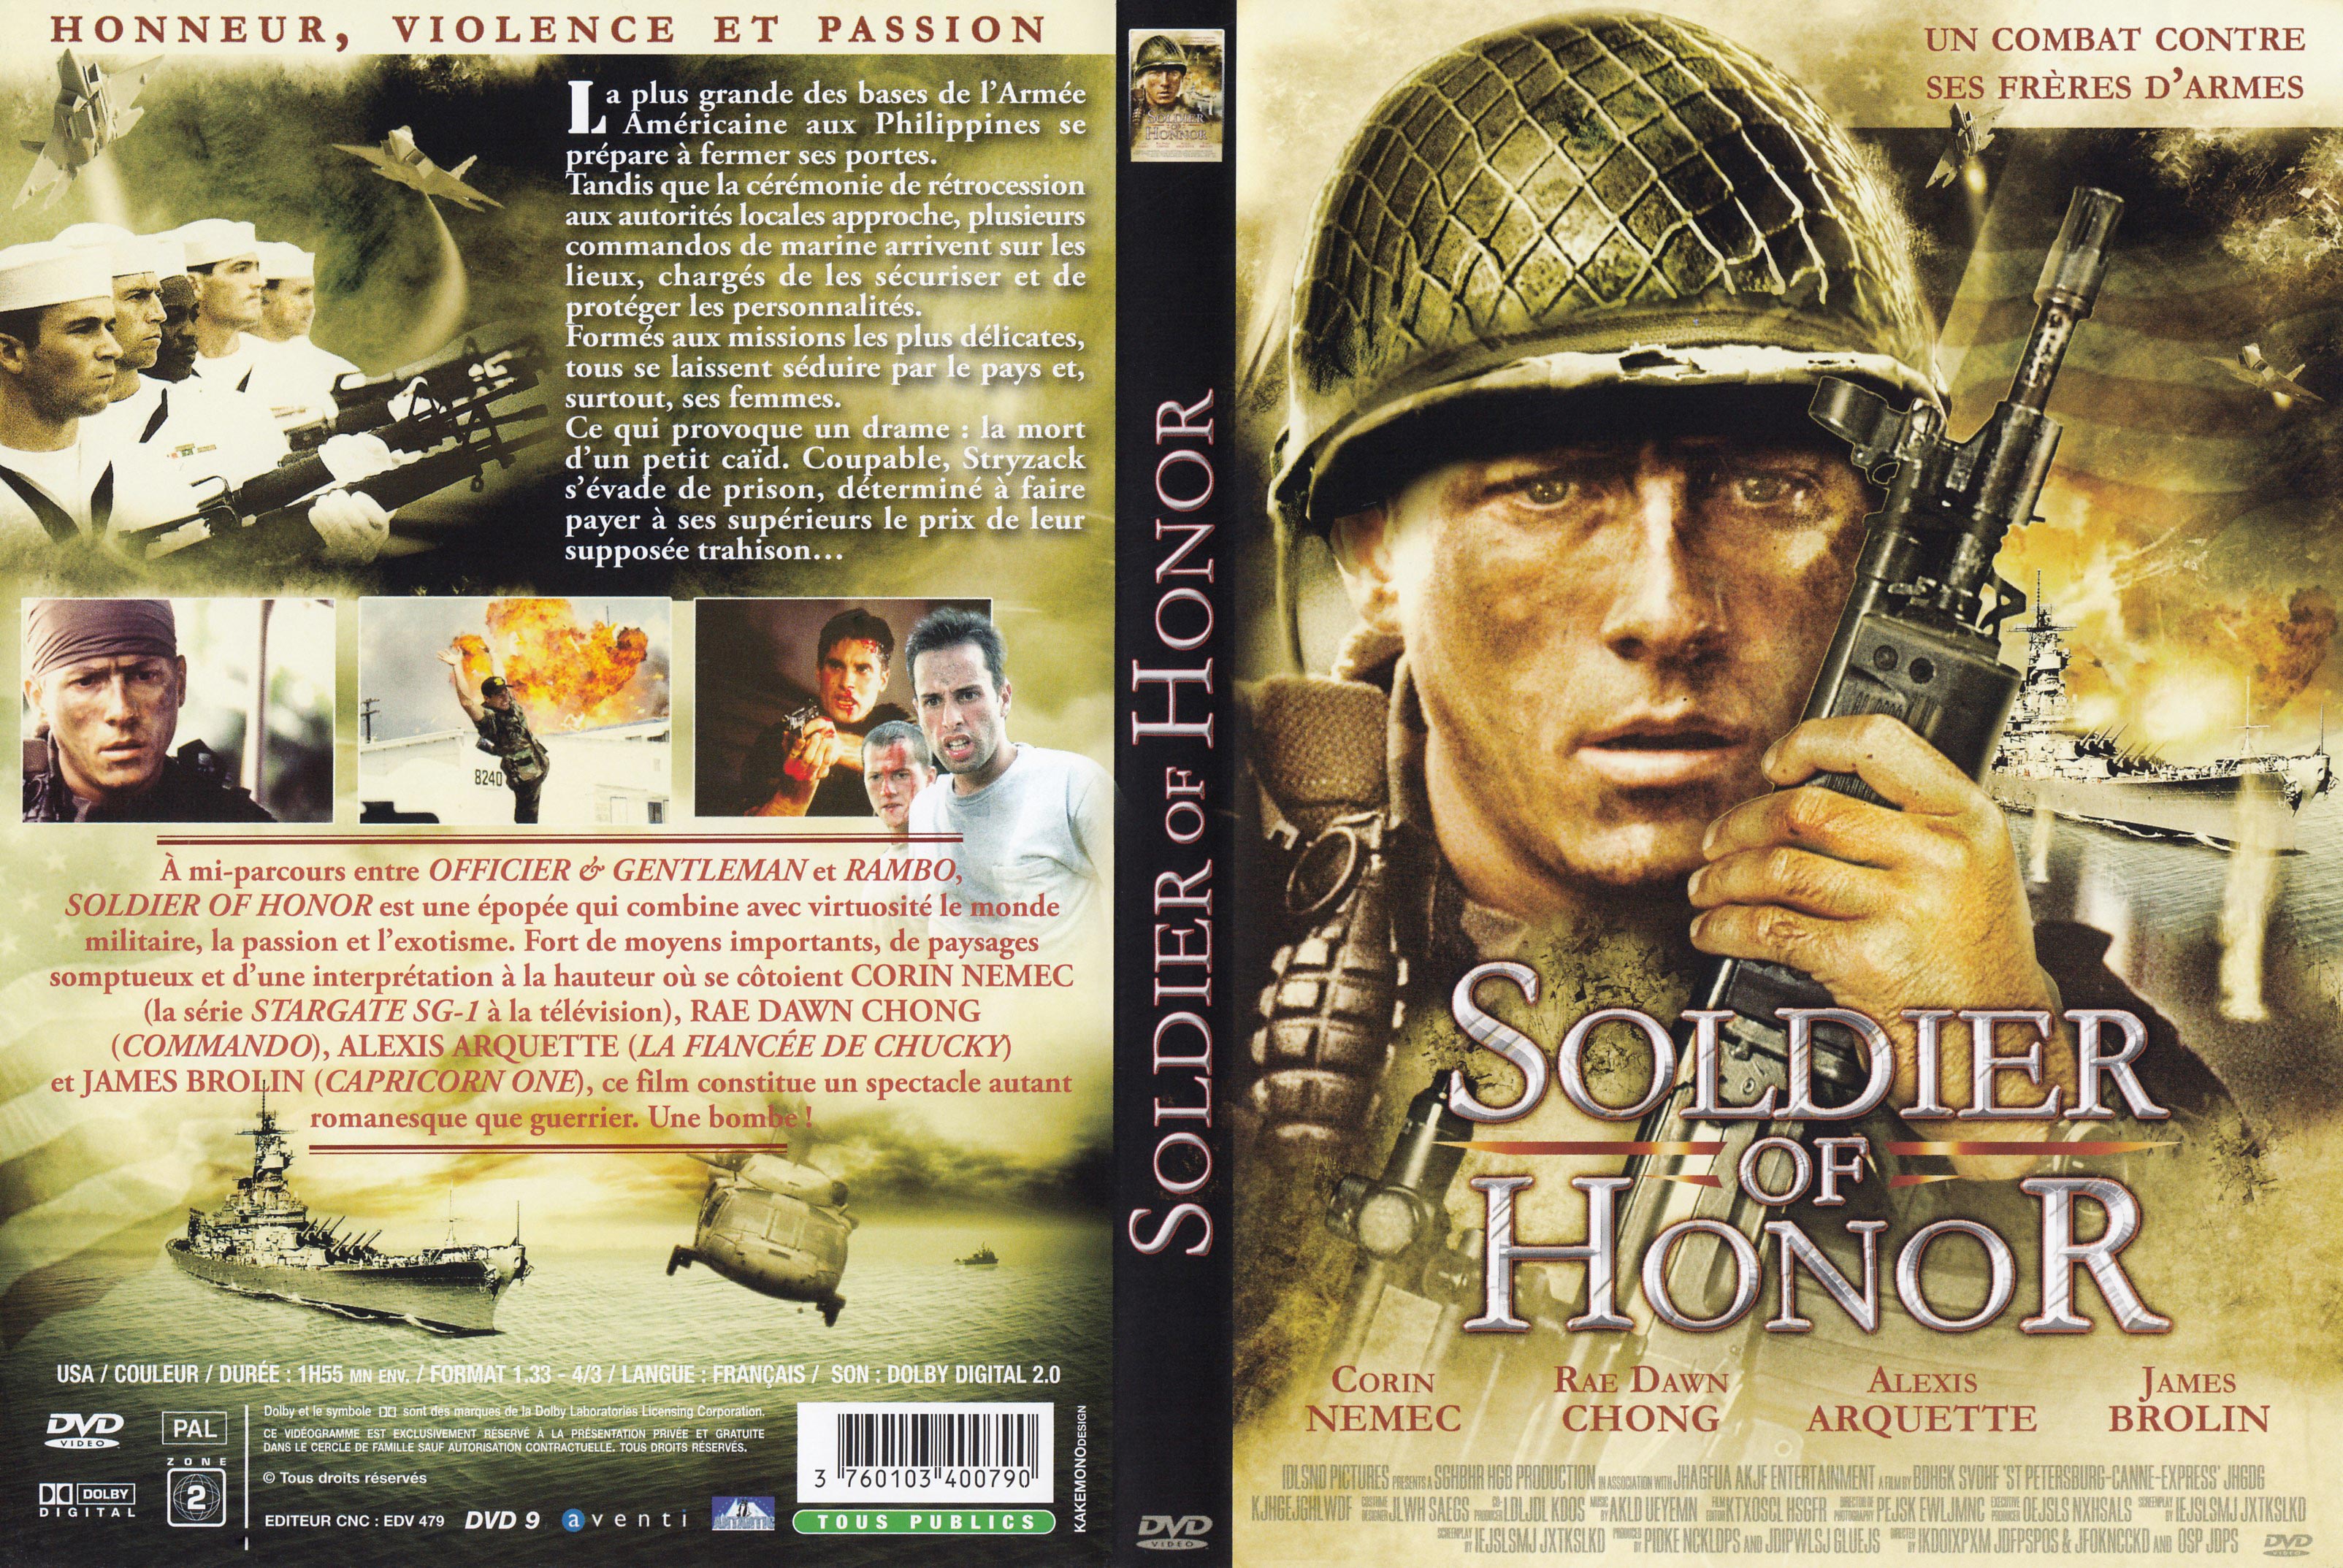 Jaquette DVD Soldier of honor (1997)